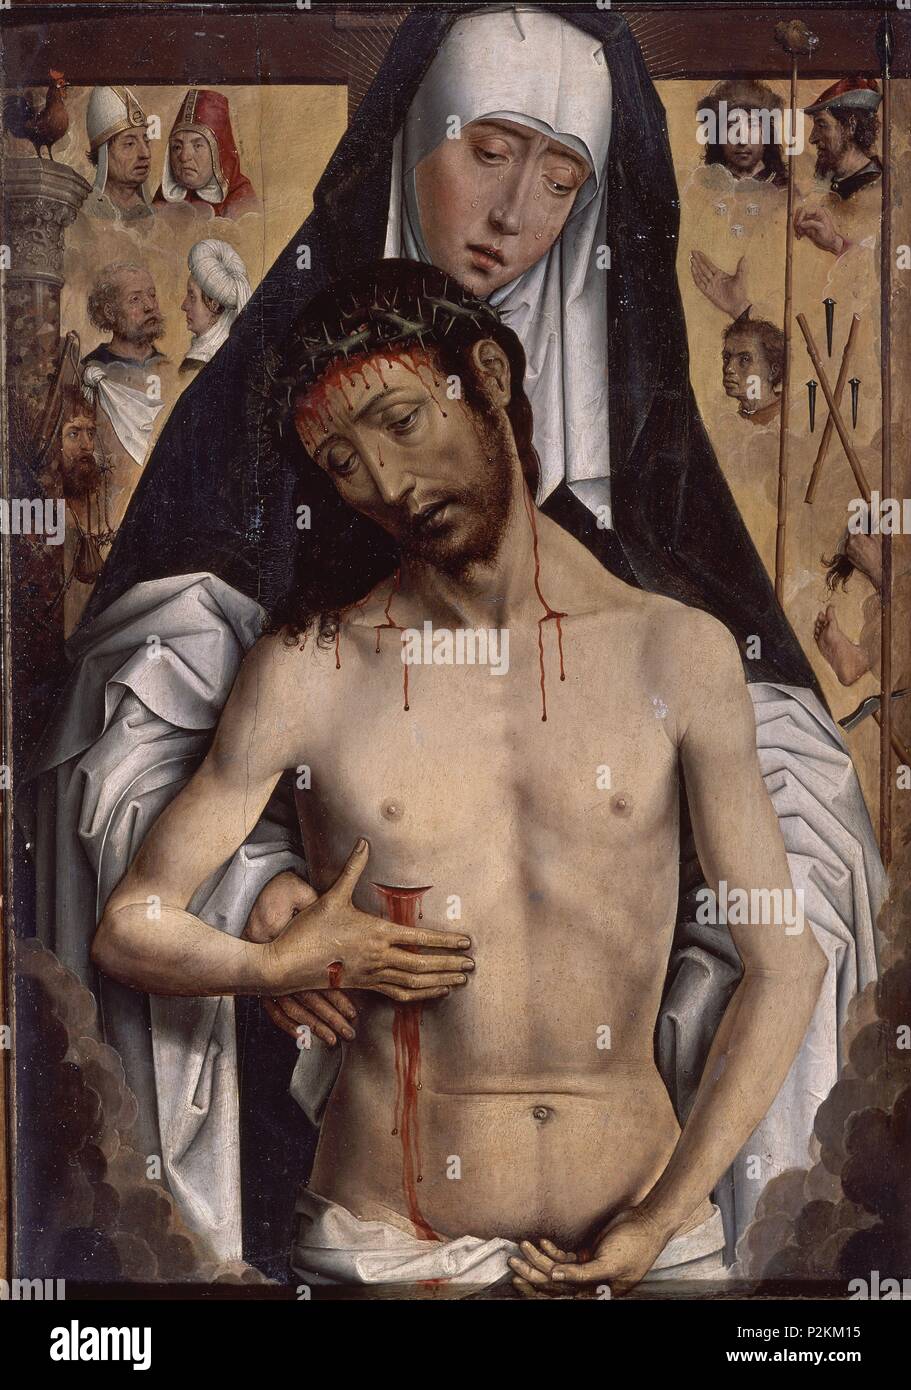 'The Virgin Showing the Man of Sorrows', c. 1475, Oil on panel, 53,3 x 37,9 cm. Author: Hans Memling (c. 1433-1494). Location: CATEDRAL-CAPILLA REAL-INTERIOR, GRANADA, SPAIN. Also known as: VIRGEN CON CRISTO MUERTO. Stock Photo